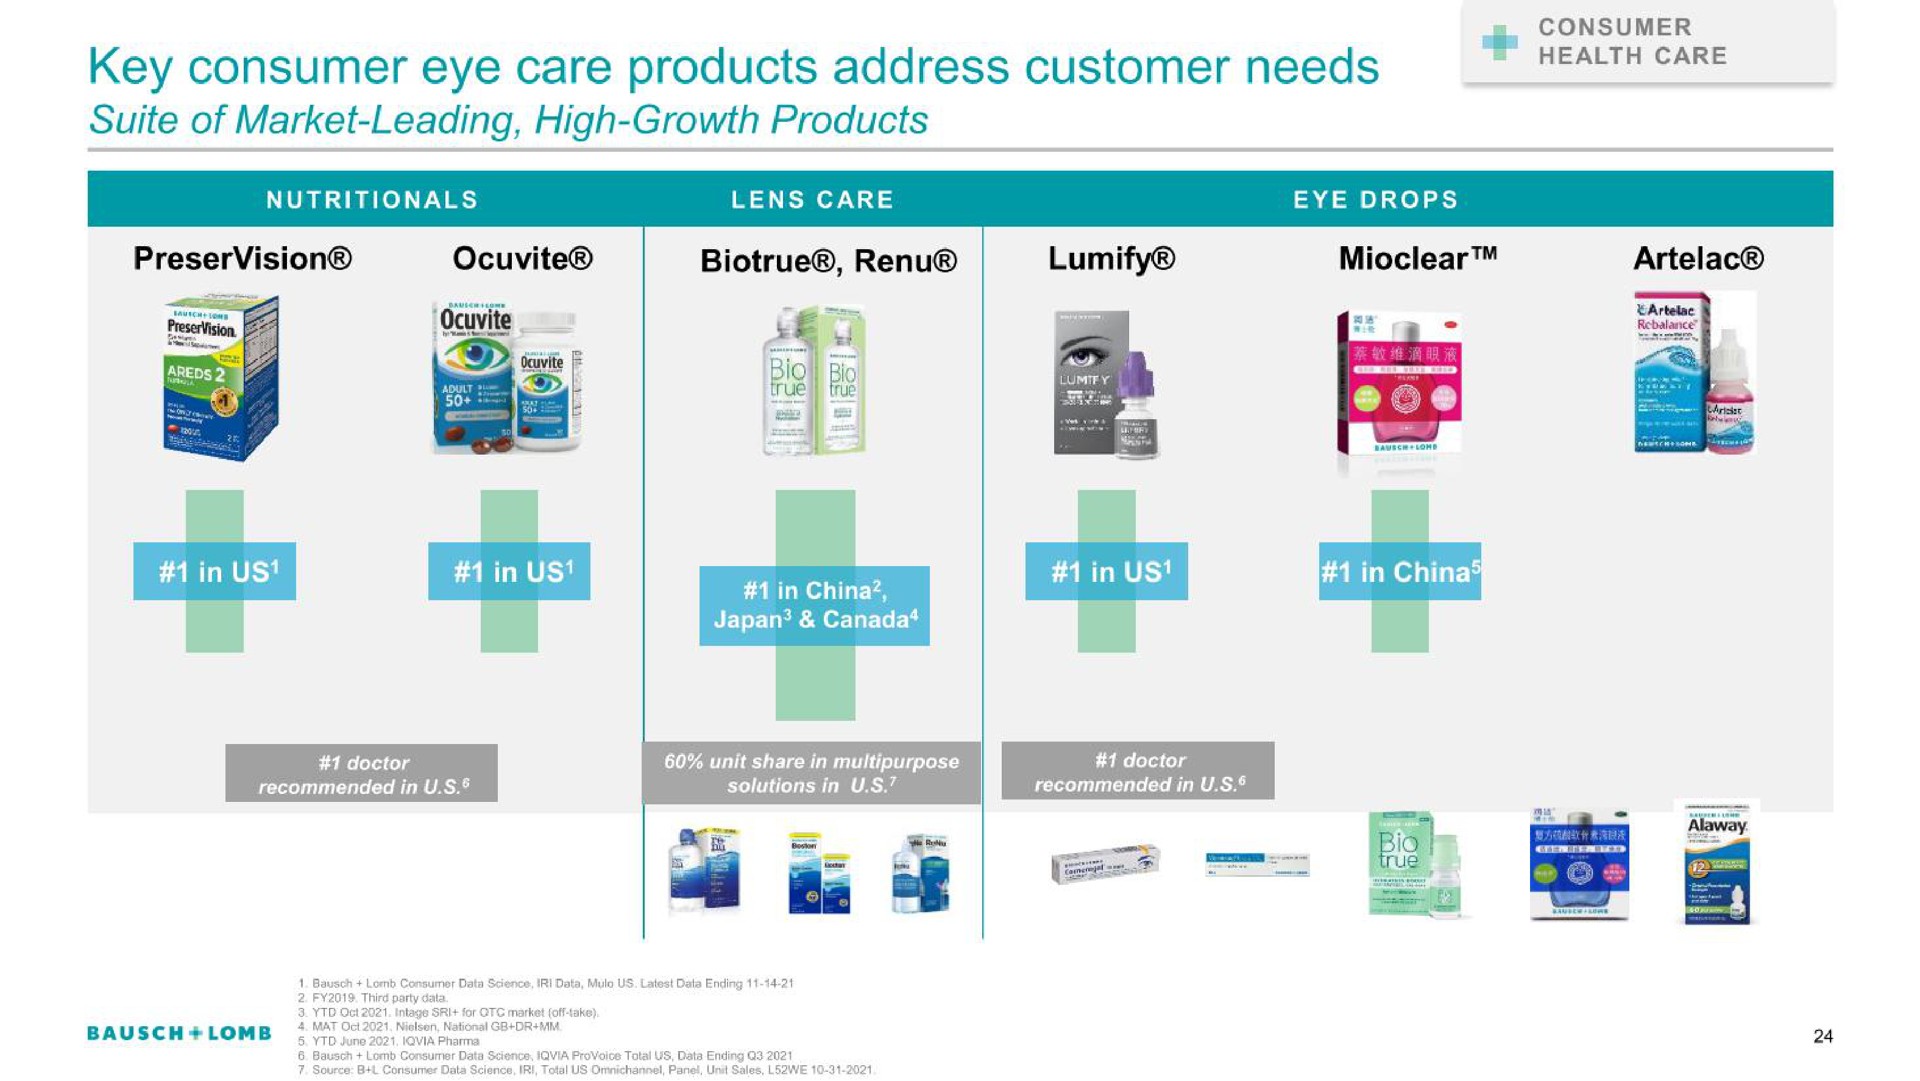 key consumer eye care products address customer needs | Bausch+Lomb